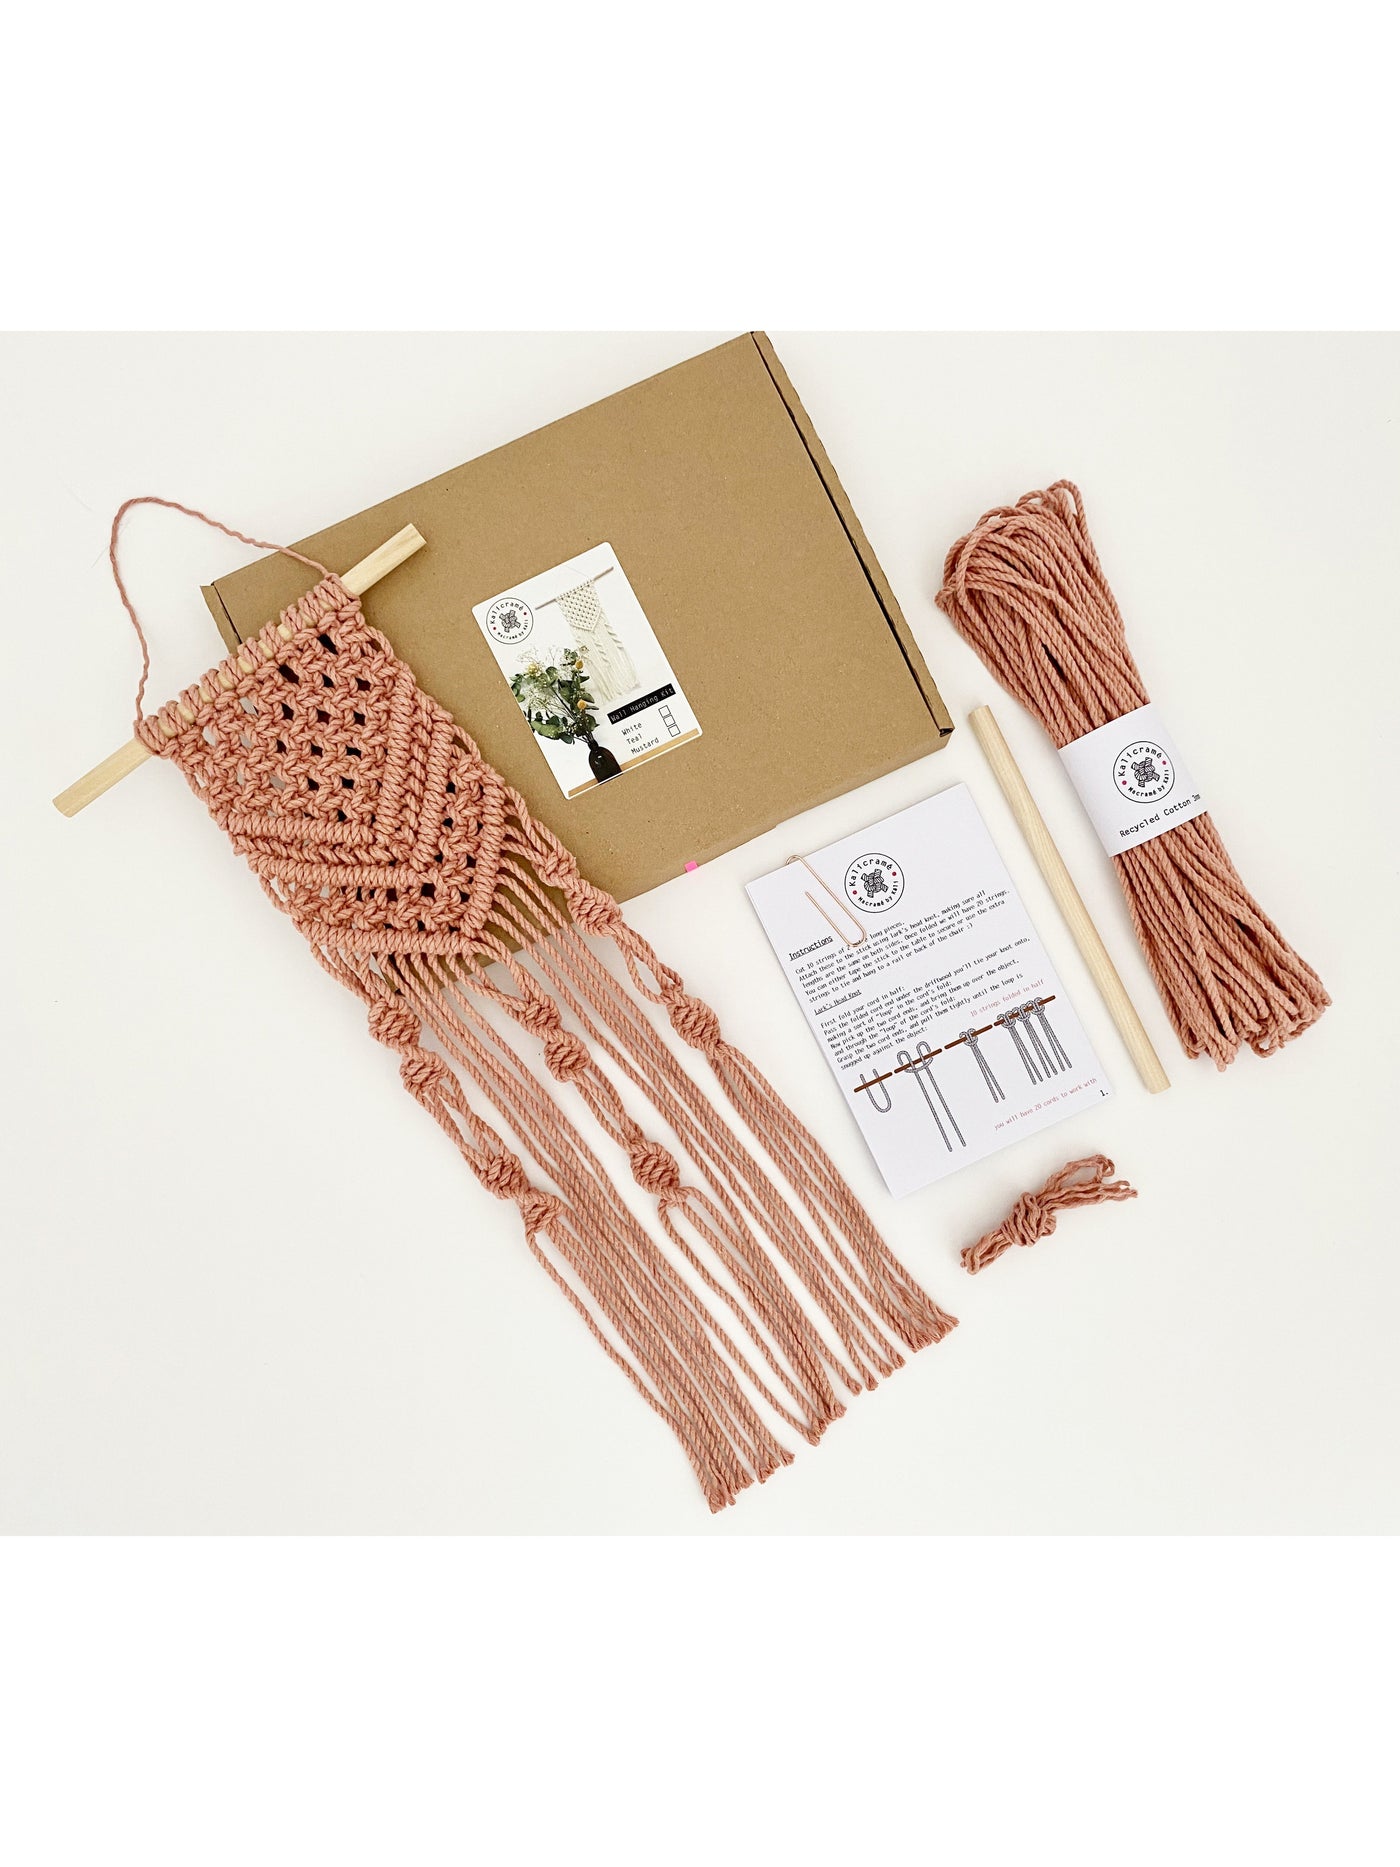 D.I.Y. Macrame Wall Hanging Kit with Video